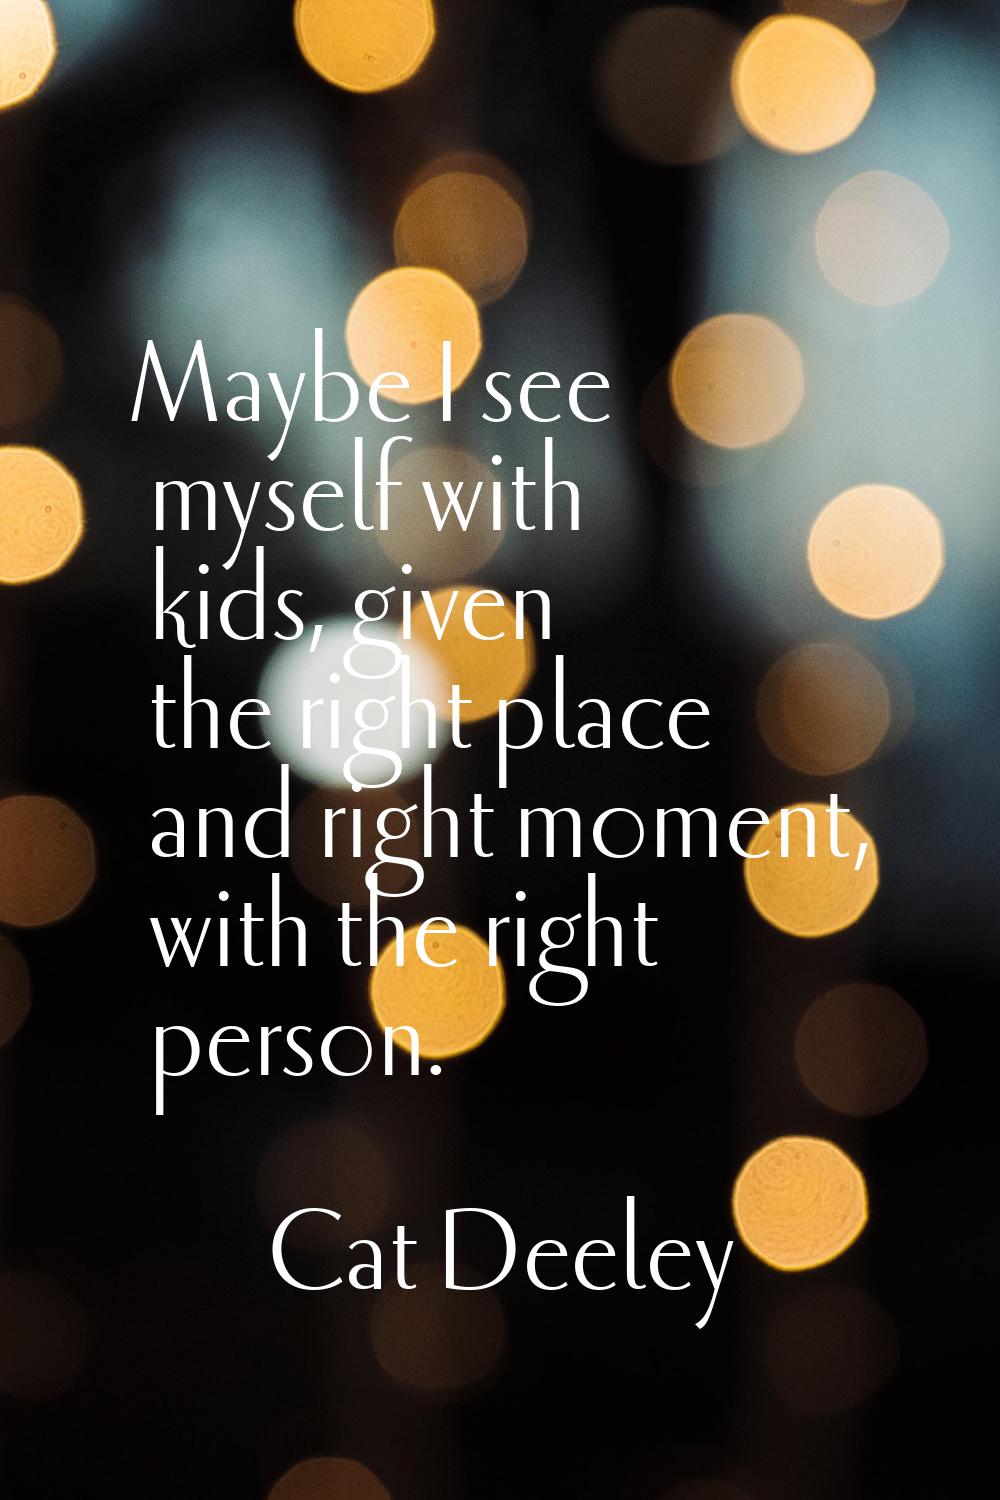 Maybe I see myself with kids, given the right place and right moment, with the right person.